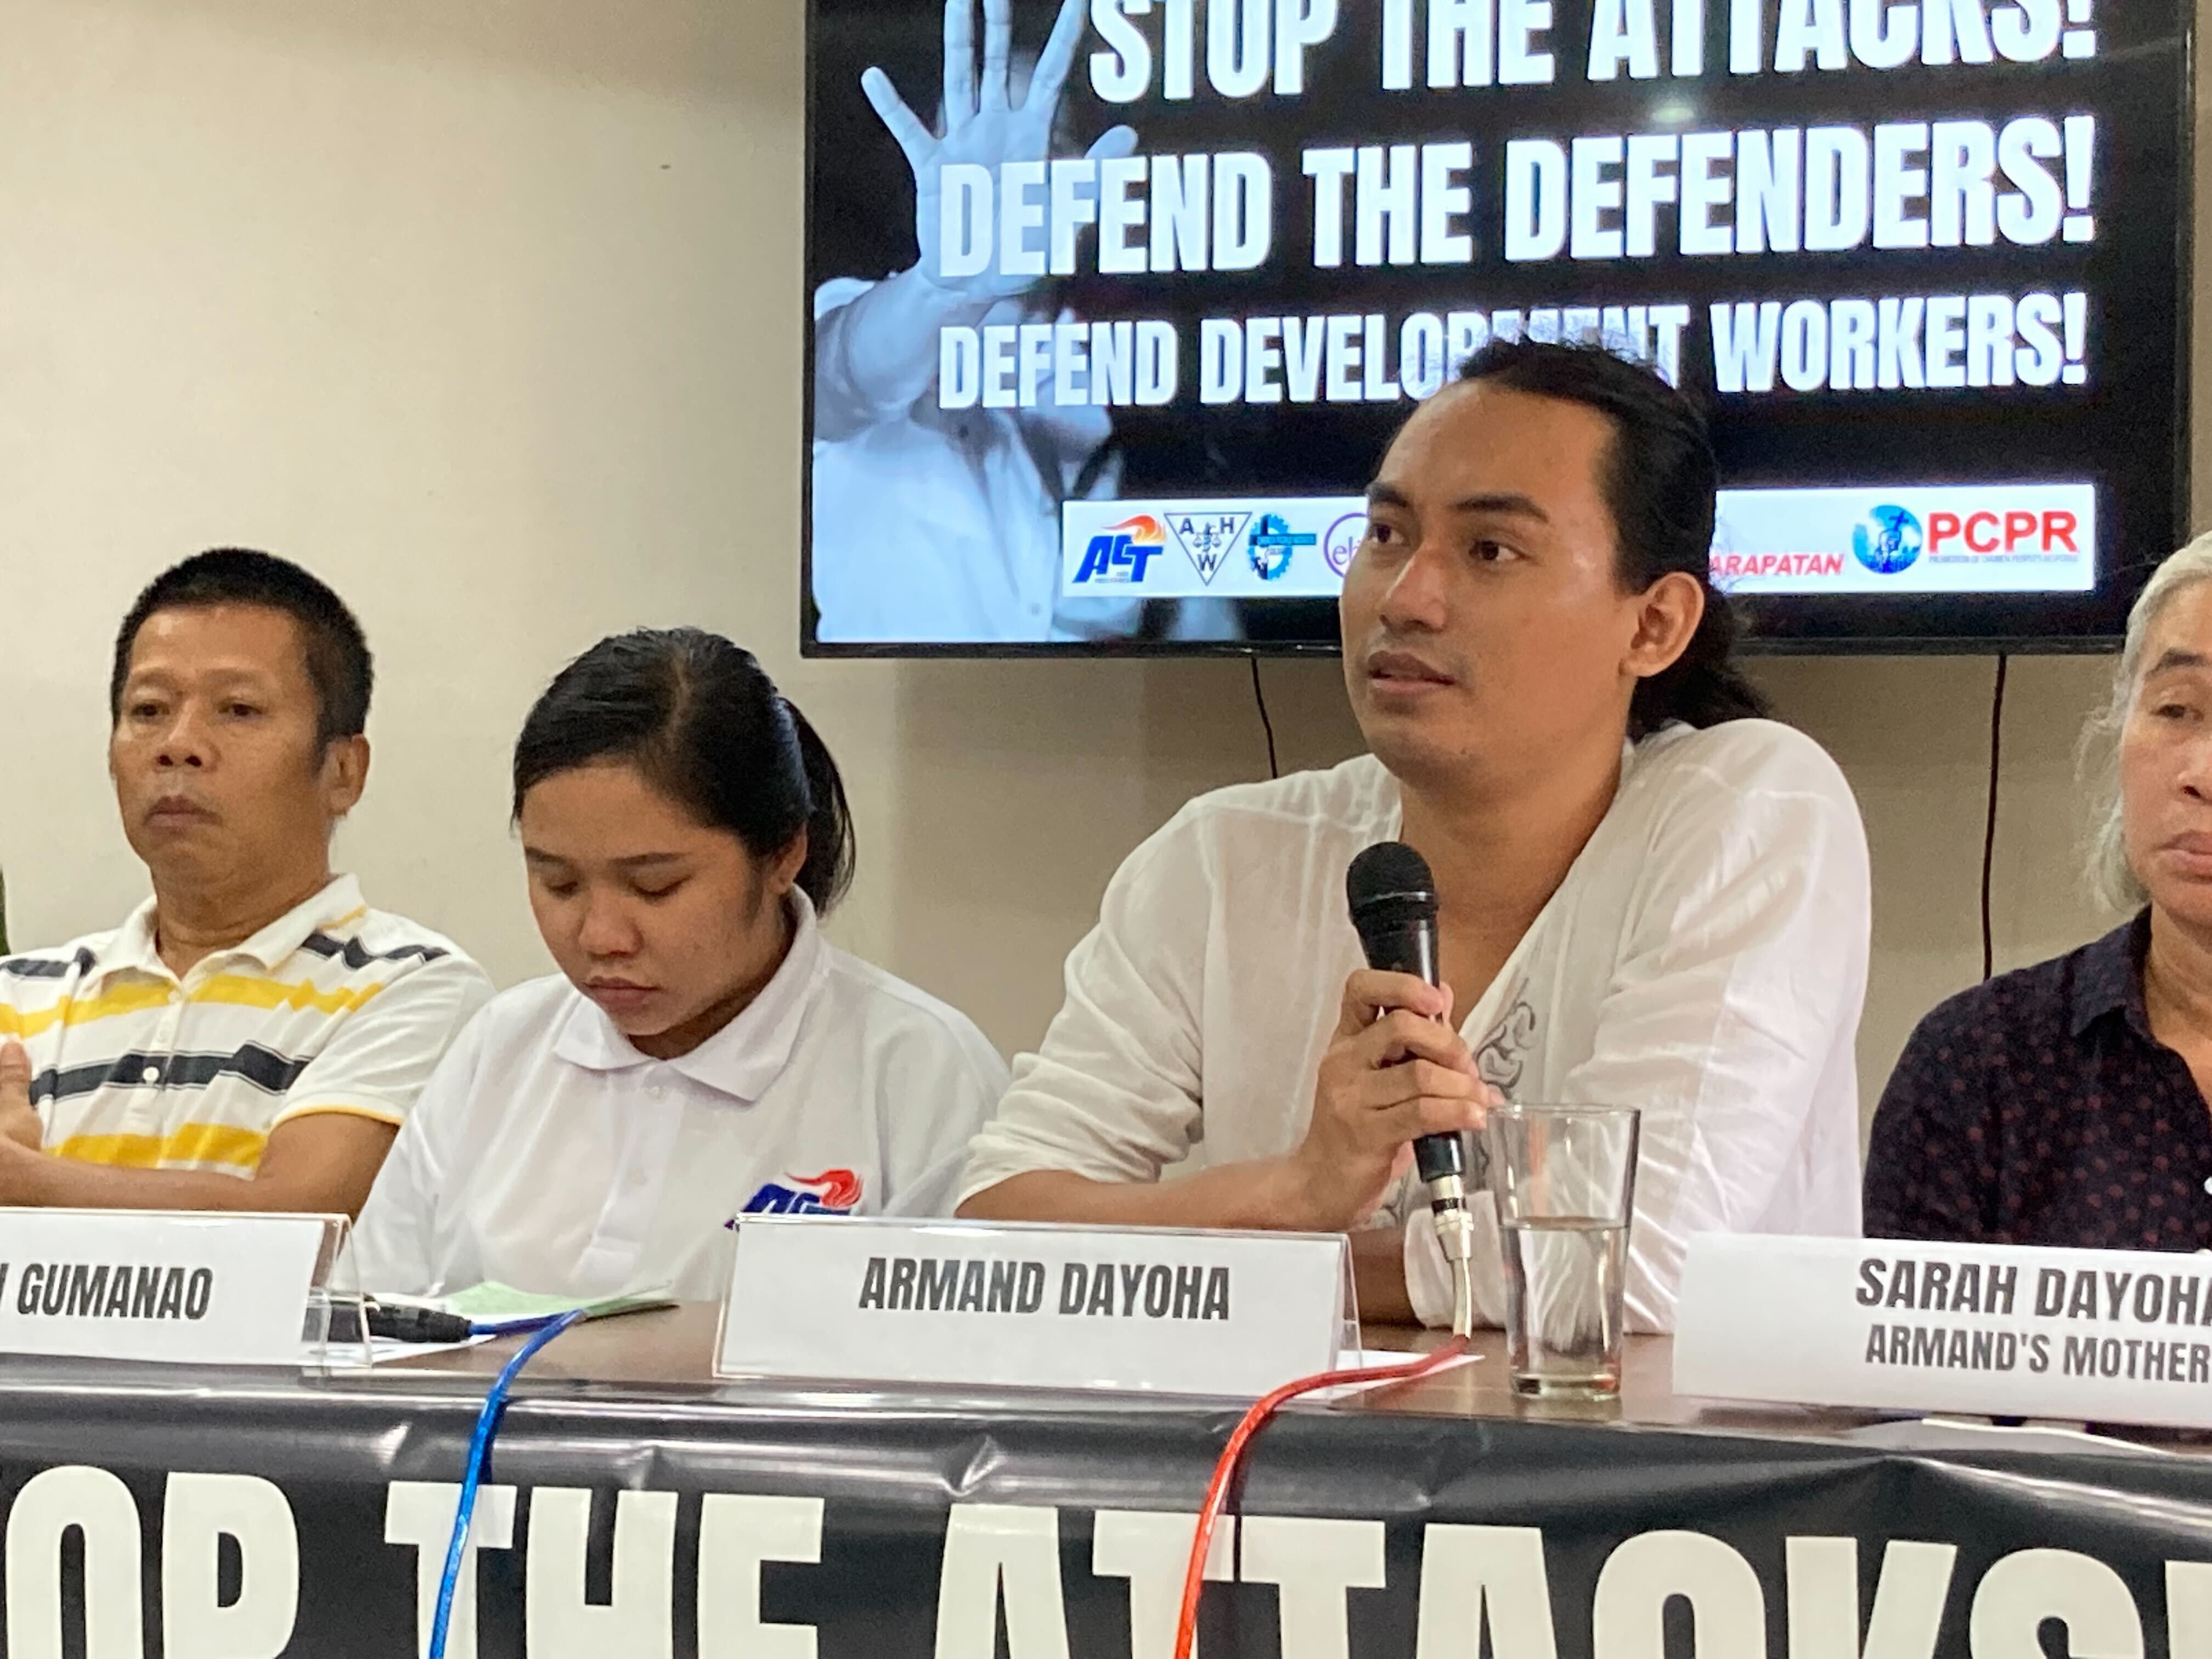 Cebu activists say readying legal action over abduction at city pier